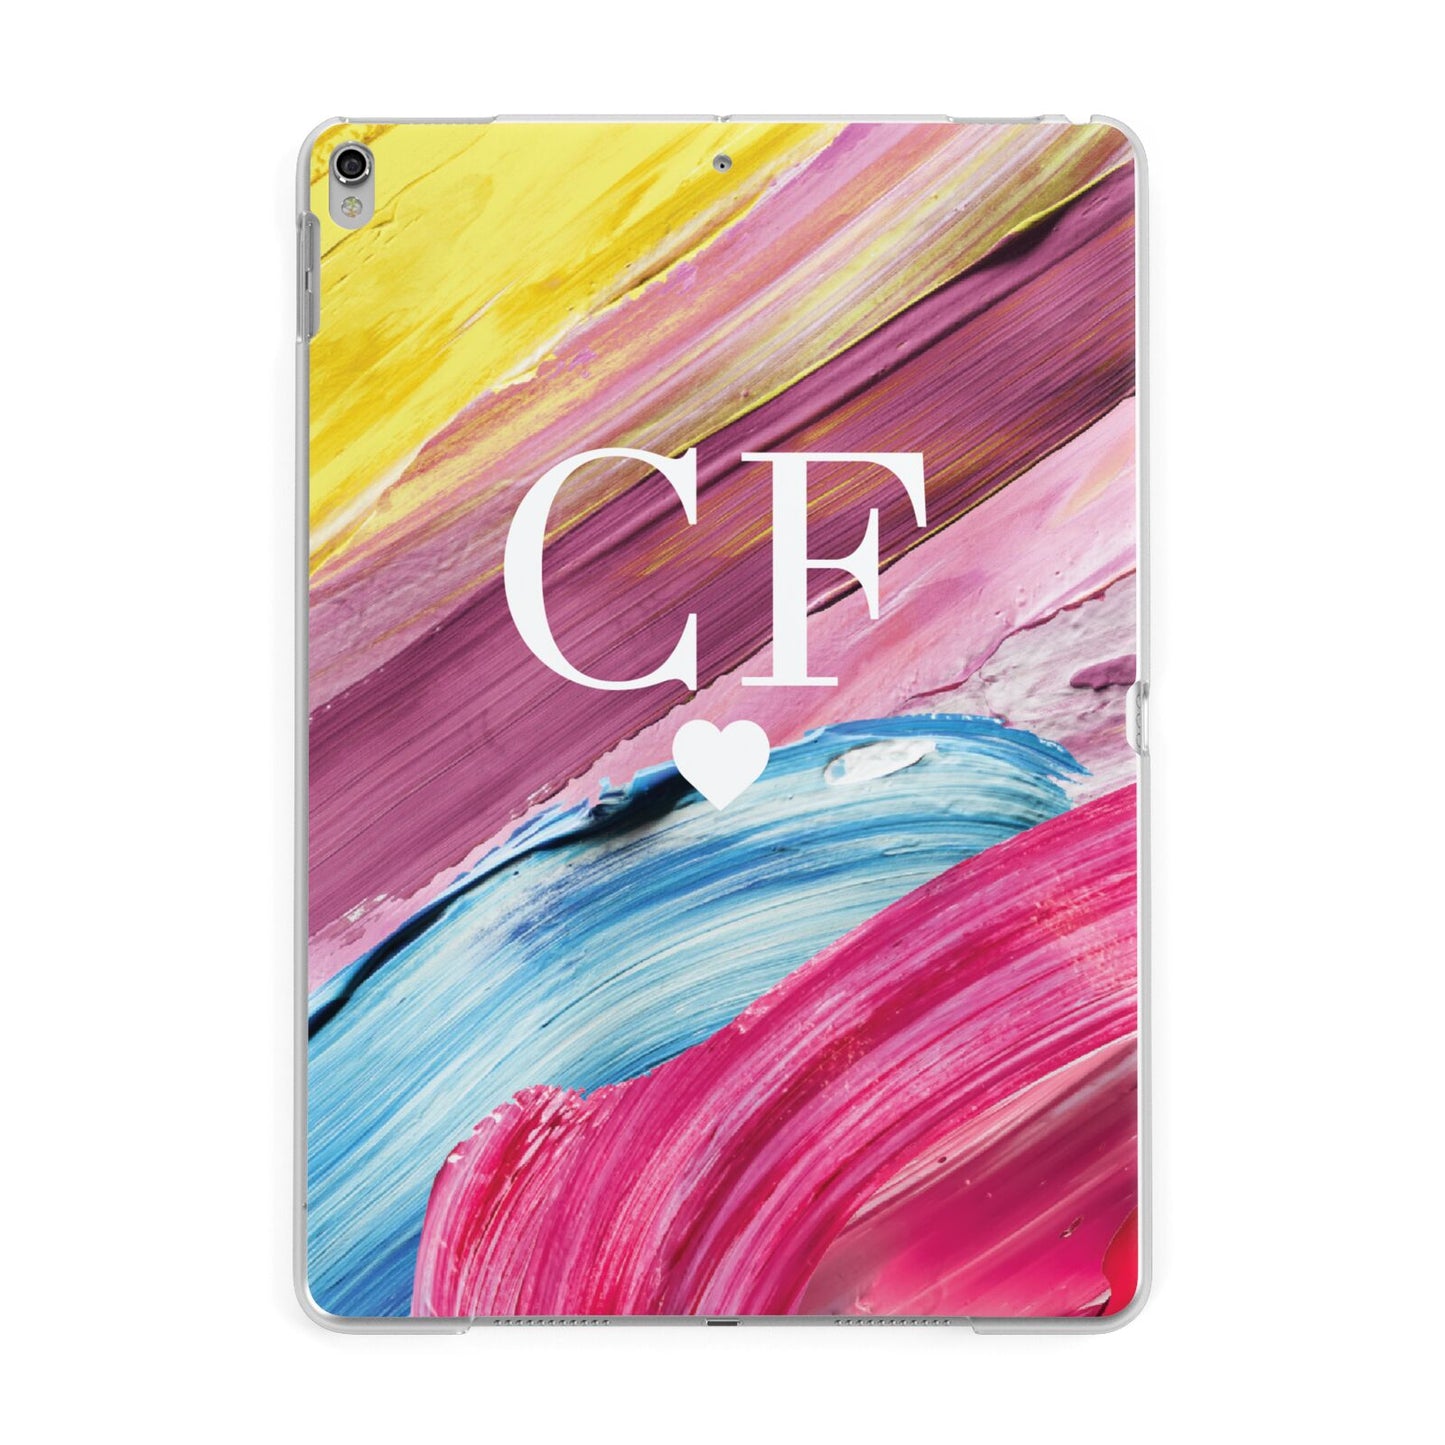 Personalised Paint Brush Initials Apple iPad Silver Case